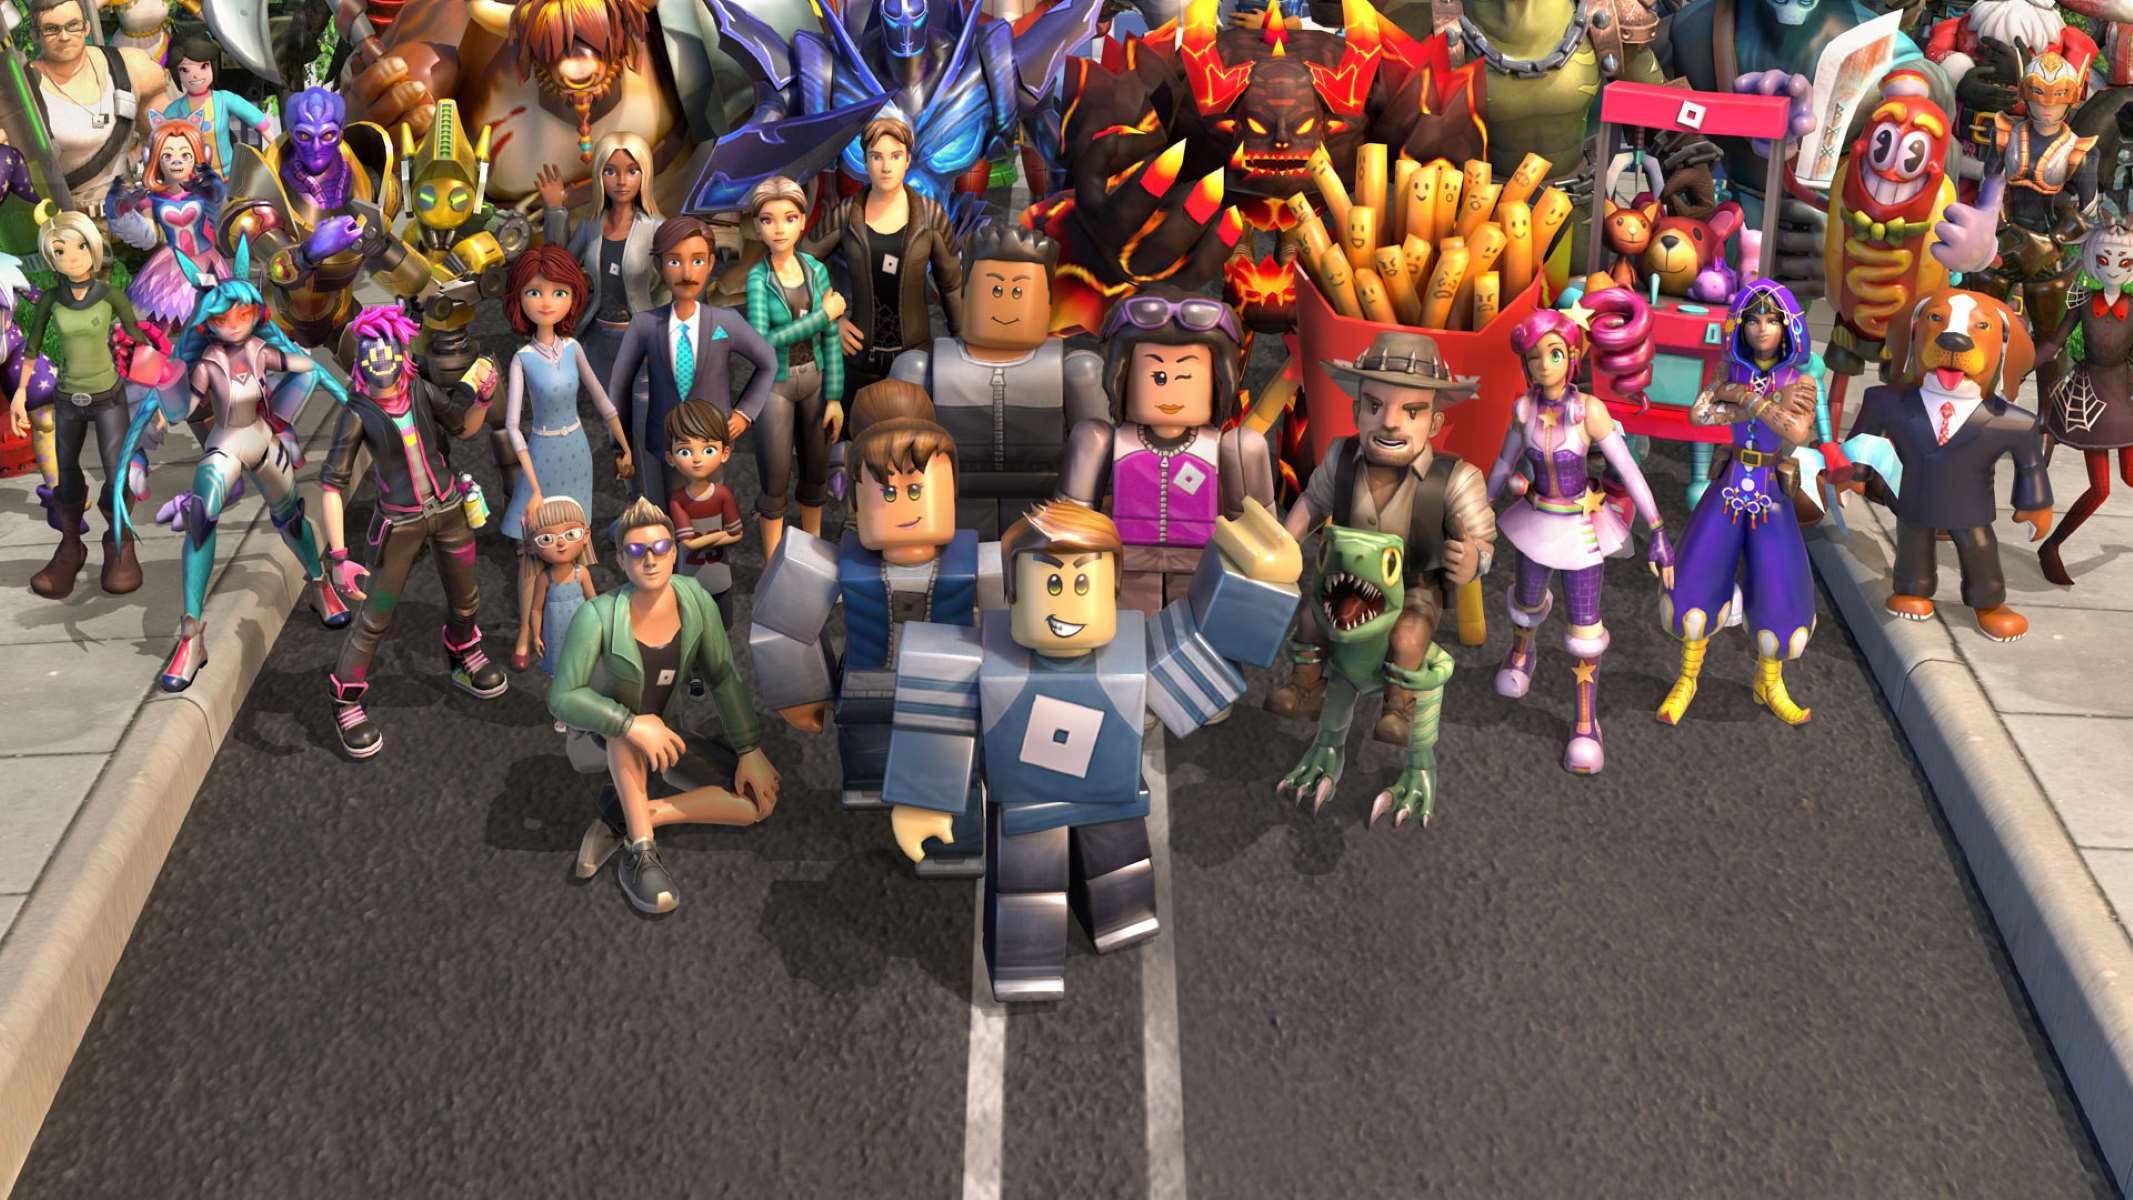 Roblox Launches On Meta Quest VR Headsets, Expanding Into The Metaverse